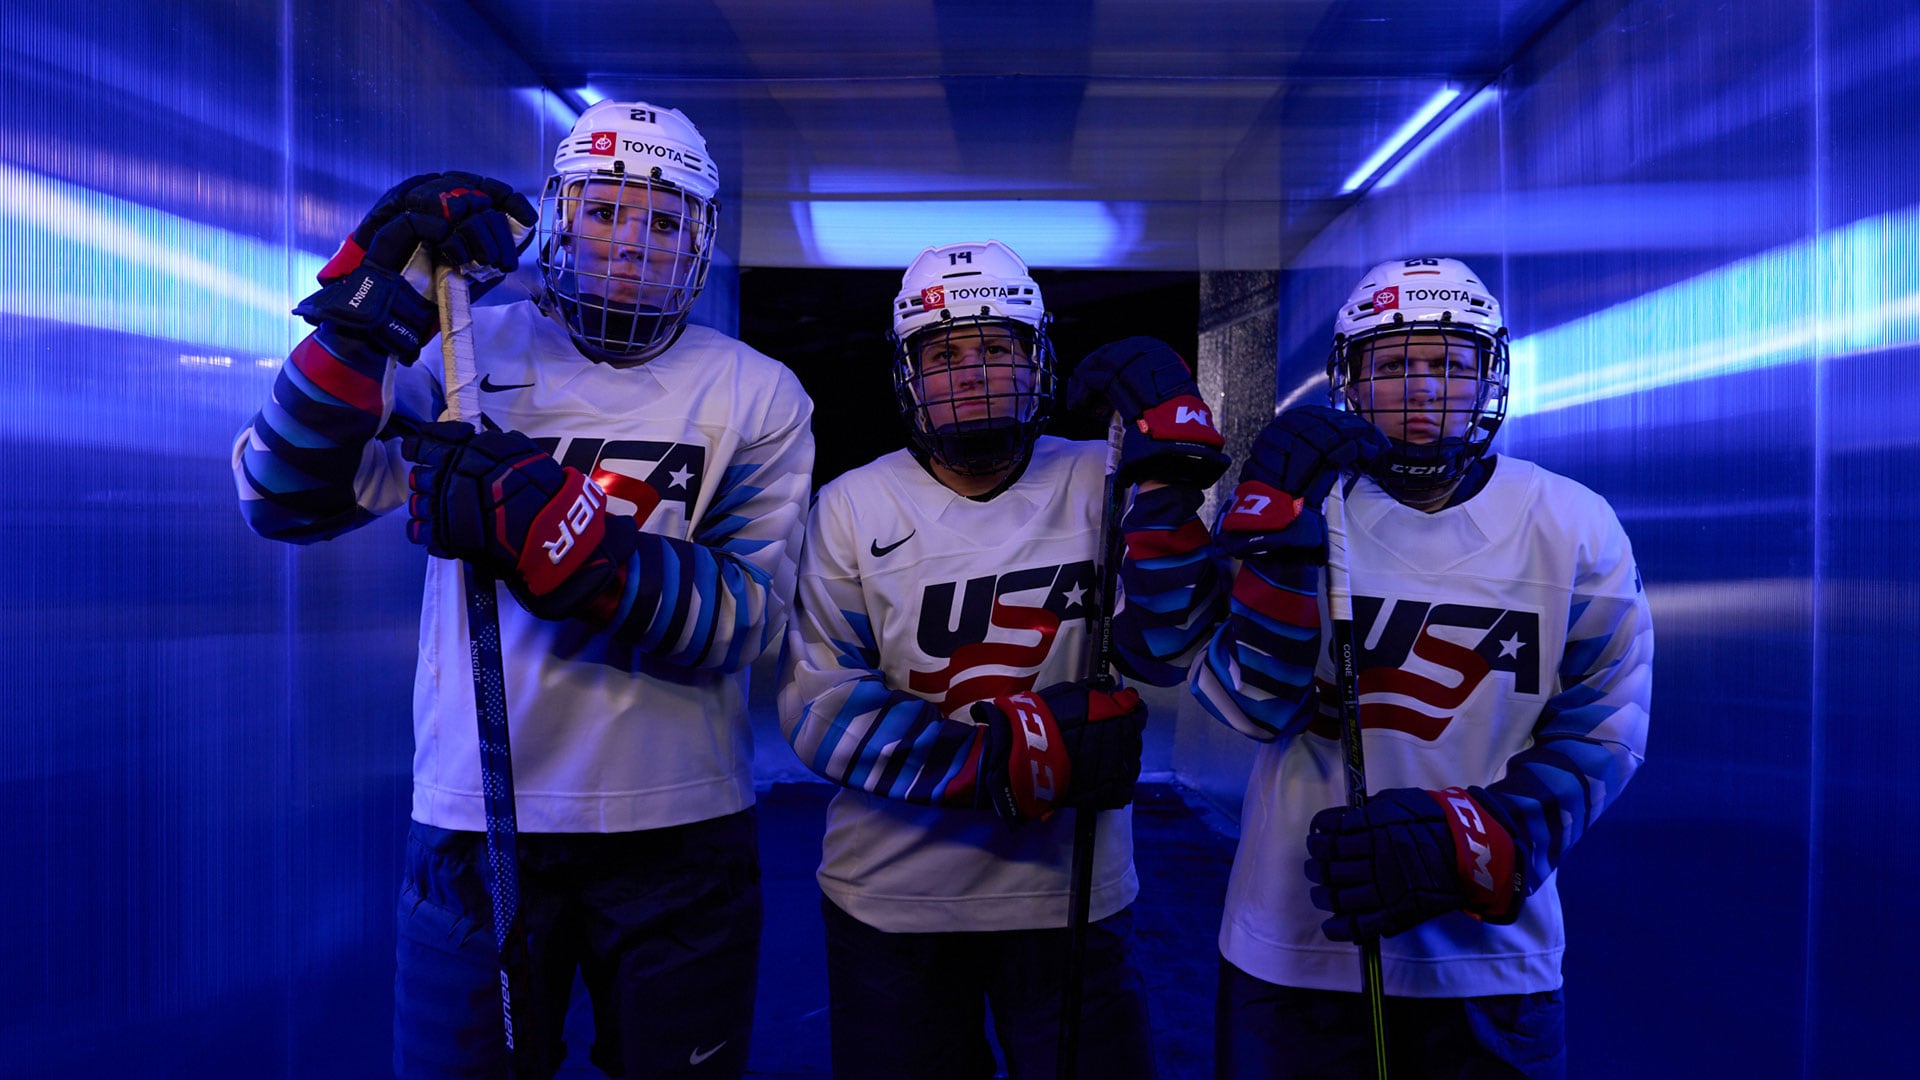 Hilary Knight, Brianna Decker and Kendall Coyne Schofield were all named to Team USA's...